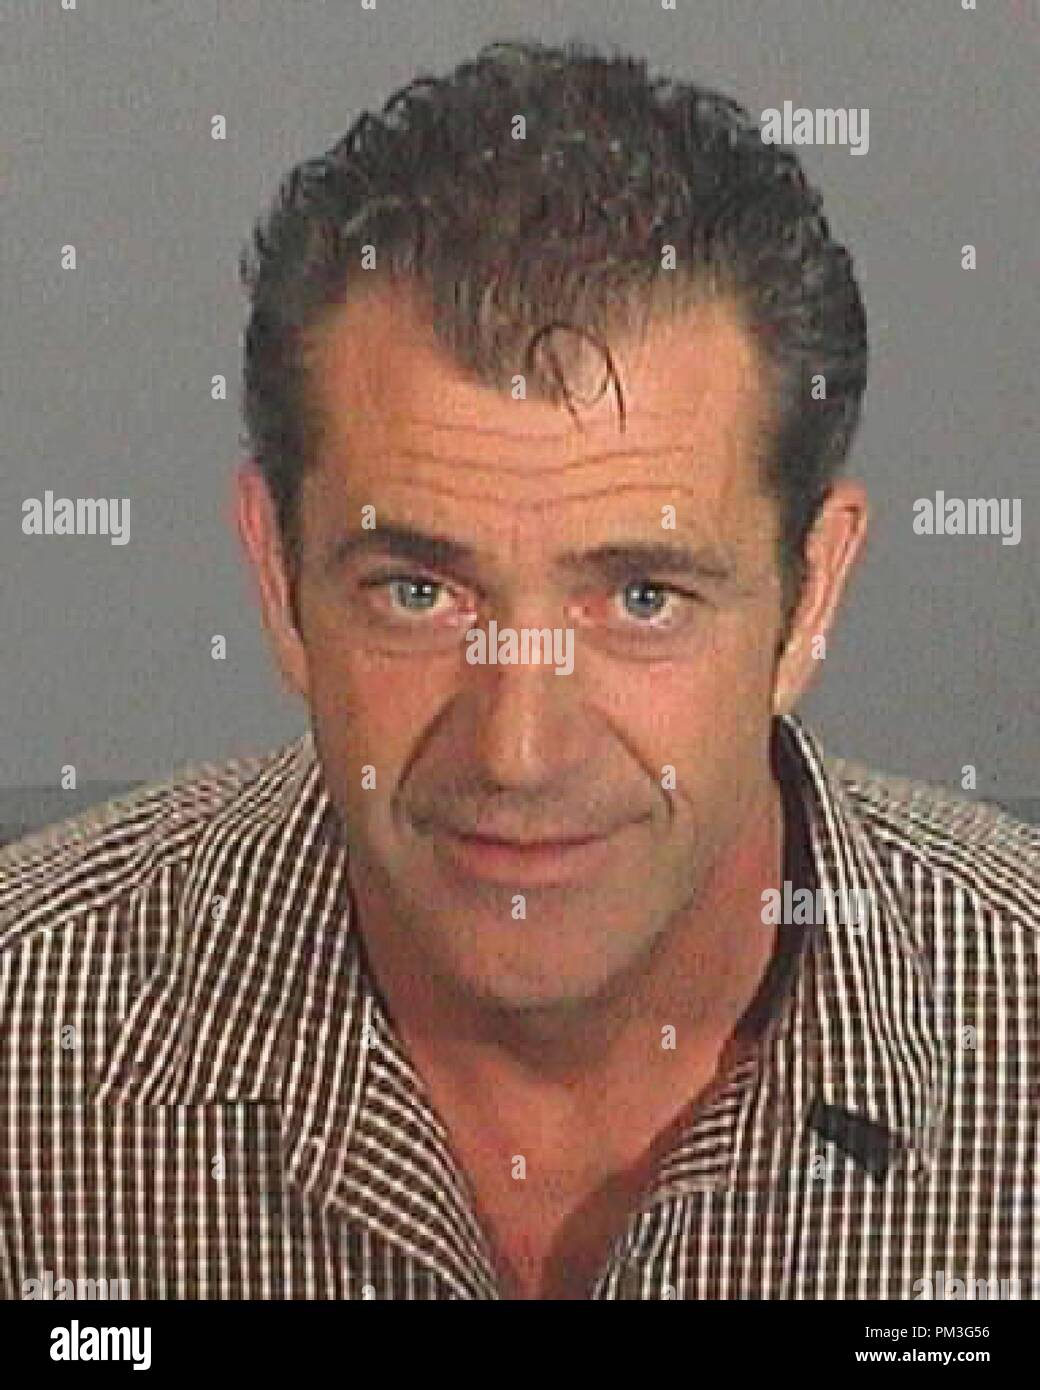 Mel Gibson Police booking photo July 28, 2006. File Reference # 30732 418THA Stock Photo